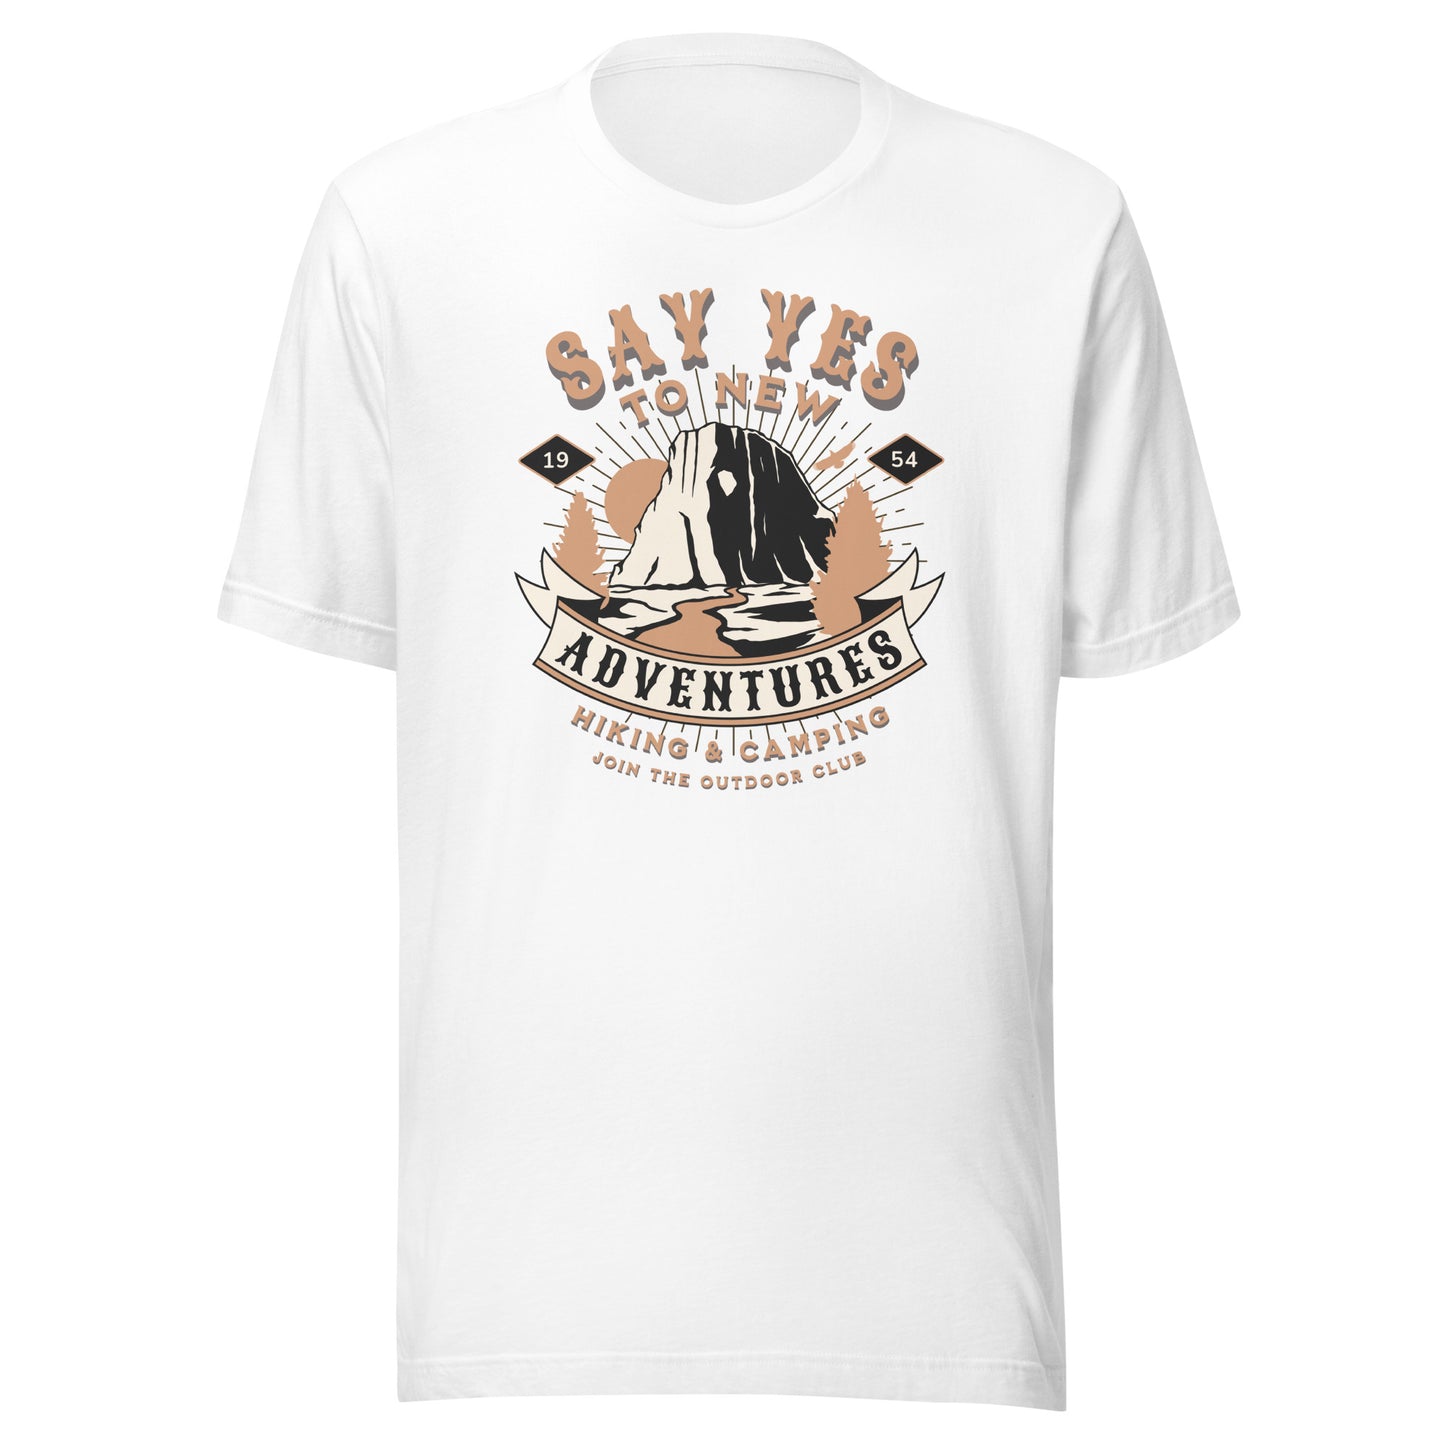 Say Yes to New Adventures Unisex T-shirt